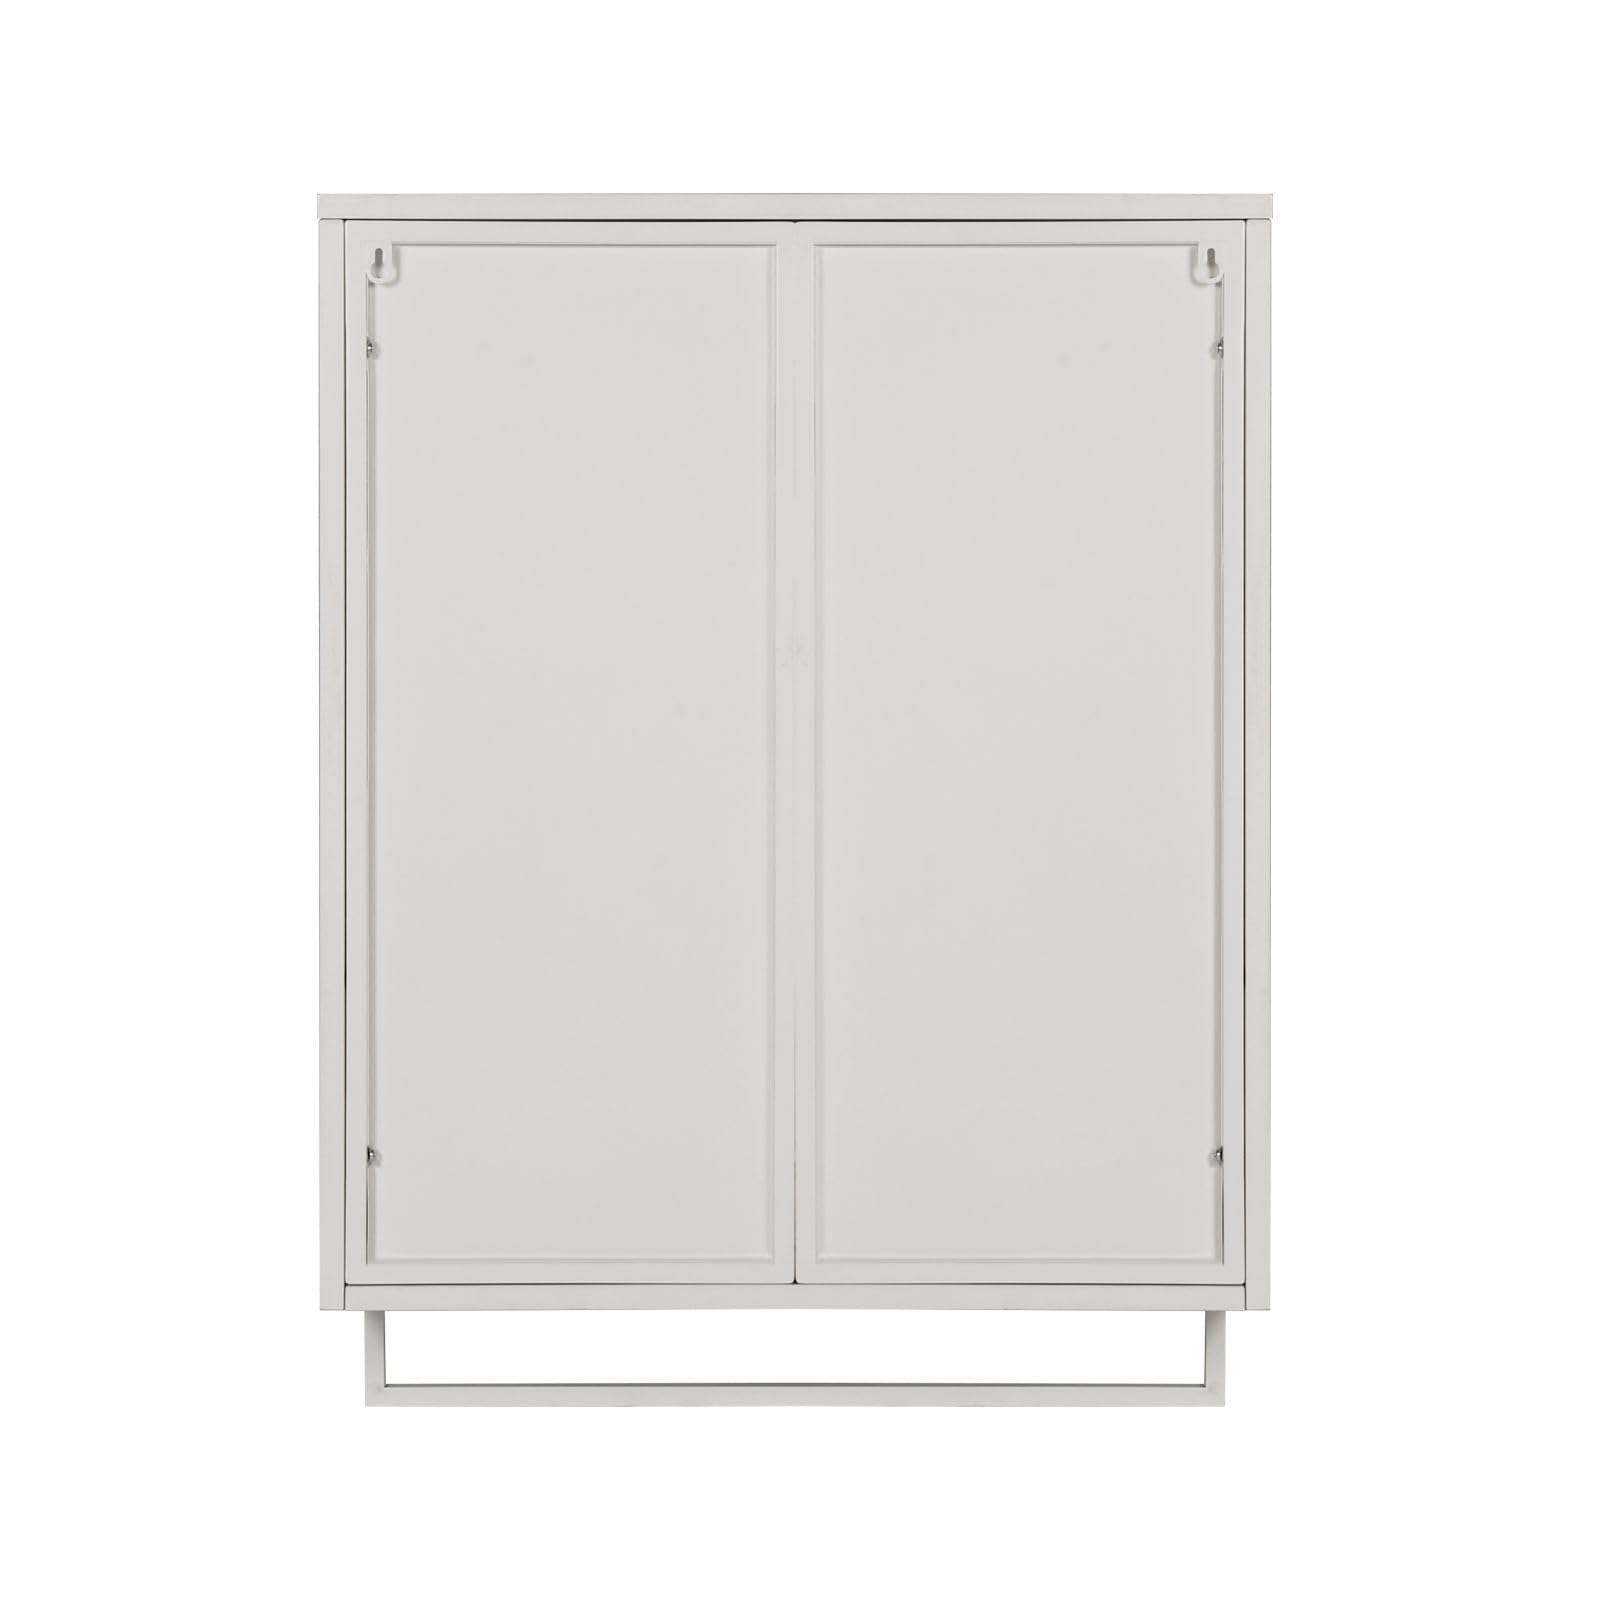 Bathroom Cabinet Wall Mounted with Detachable Shelves,Double Glass Door Wall Storage Cabinet,Kitchen Pantry Sideboard,Wall Storage Organizer for Bathroom Kitchen Laundry Room Dining Room White Style 3